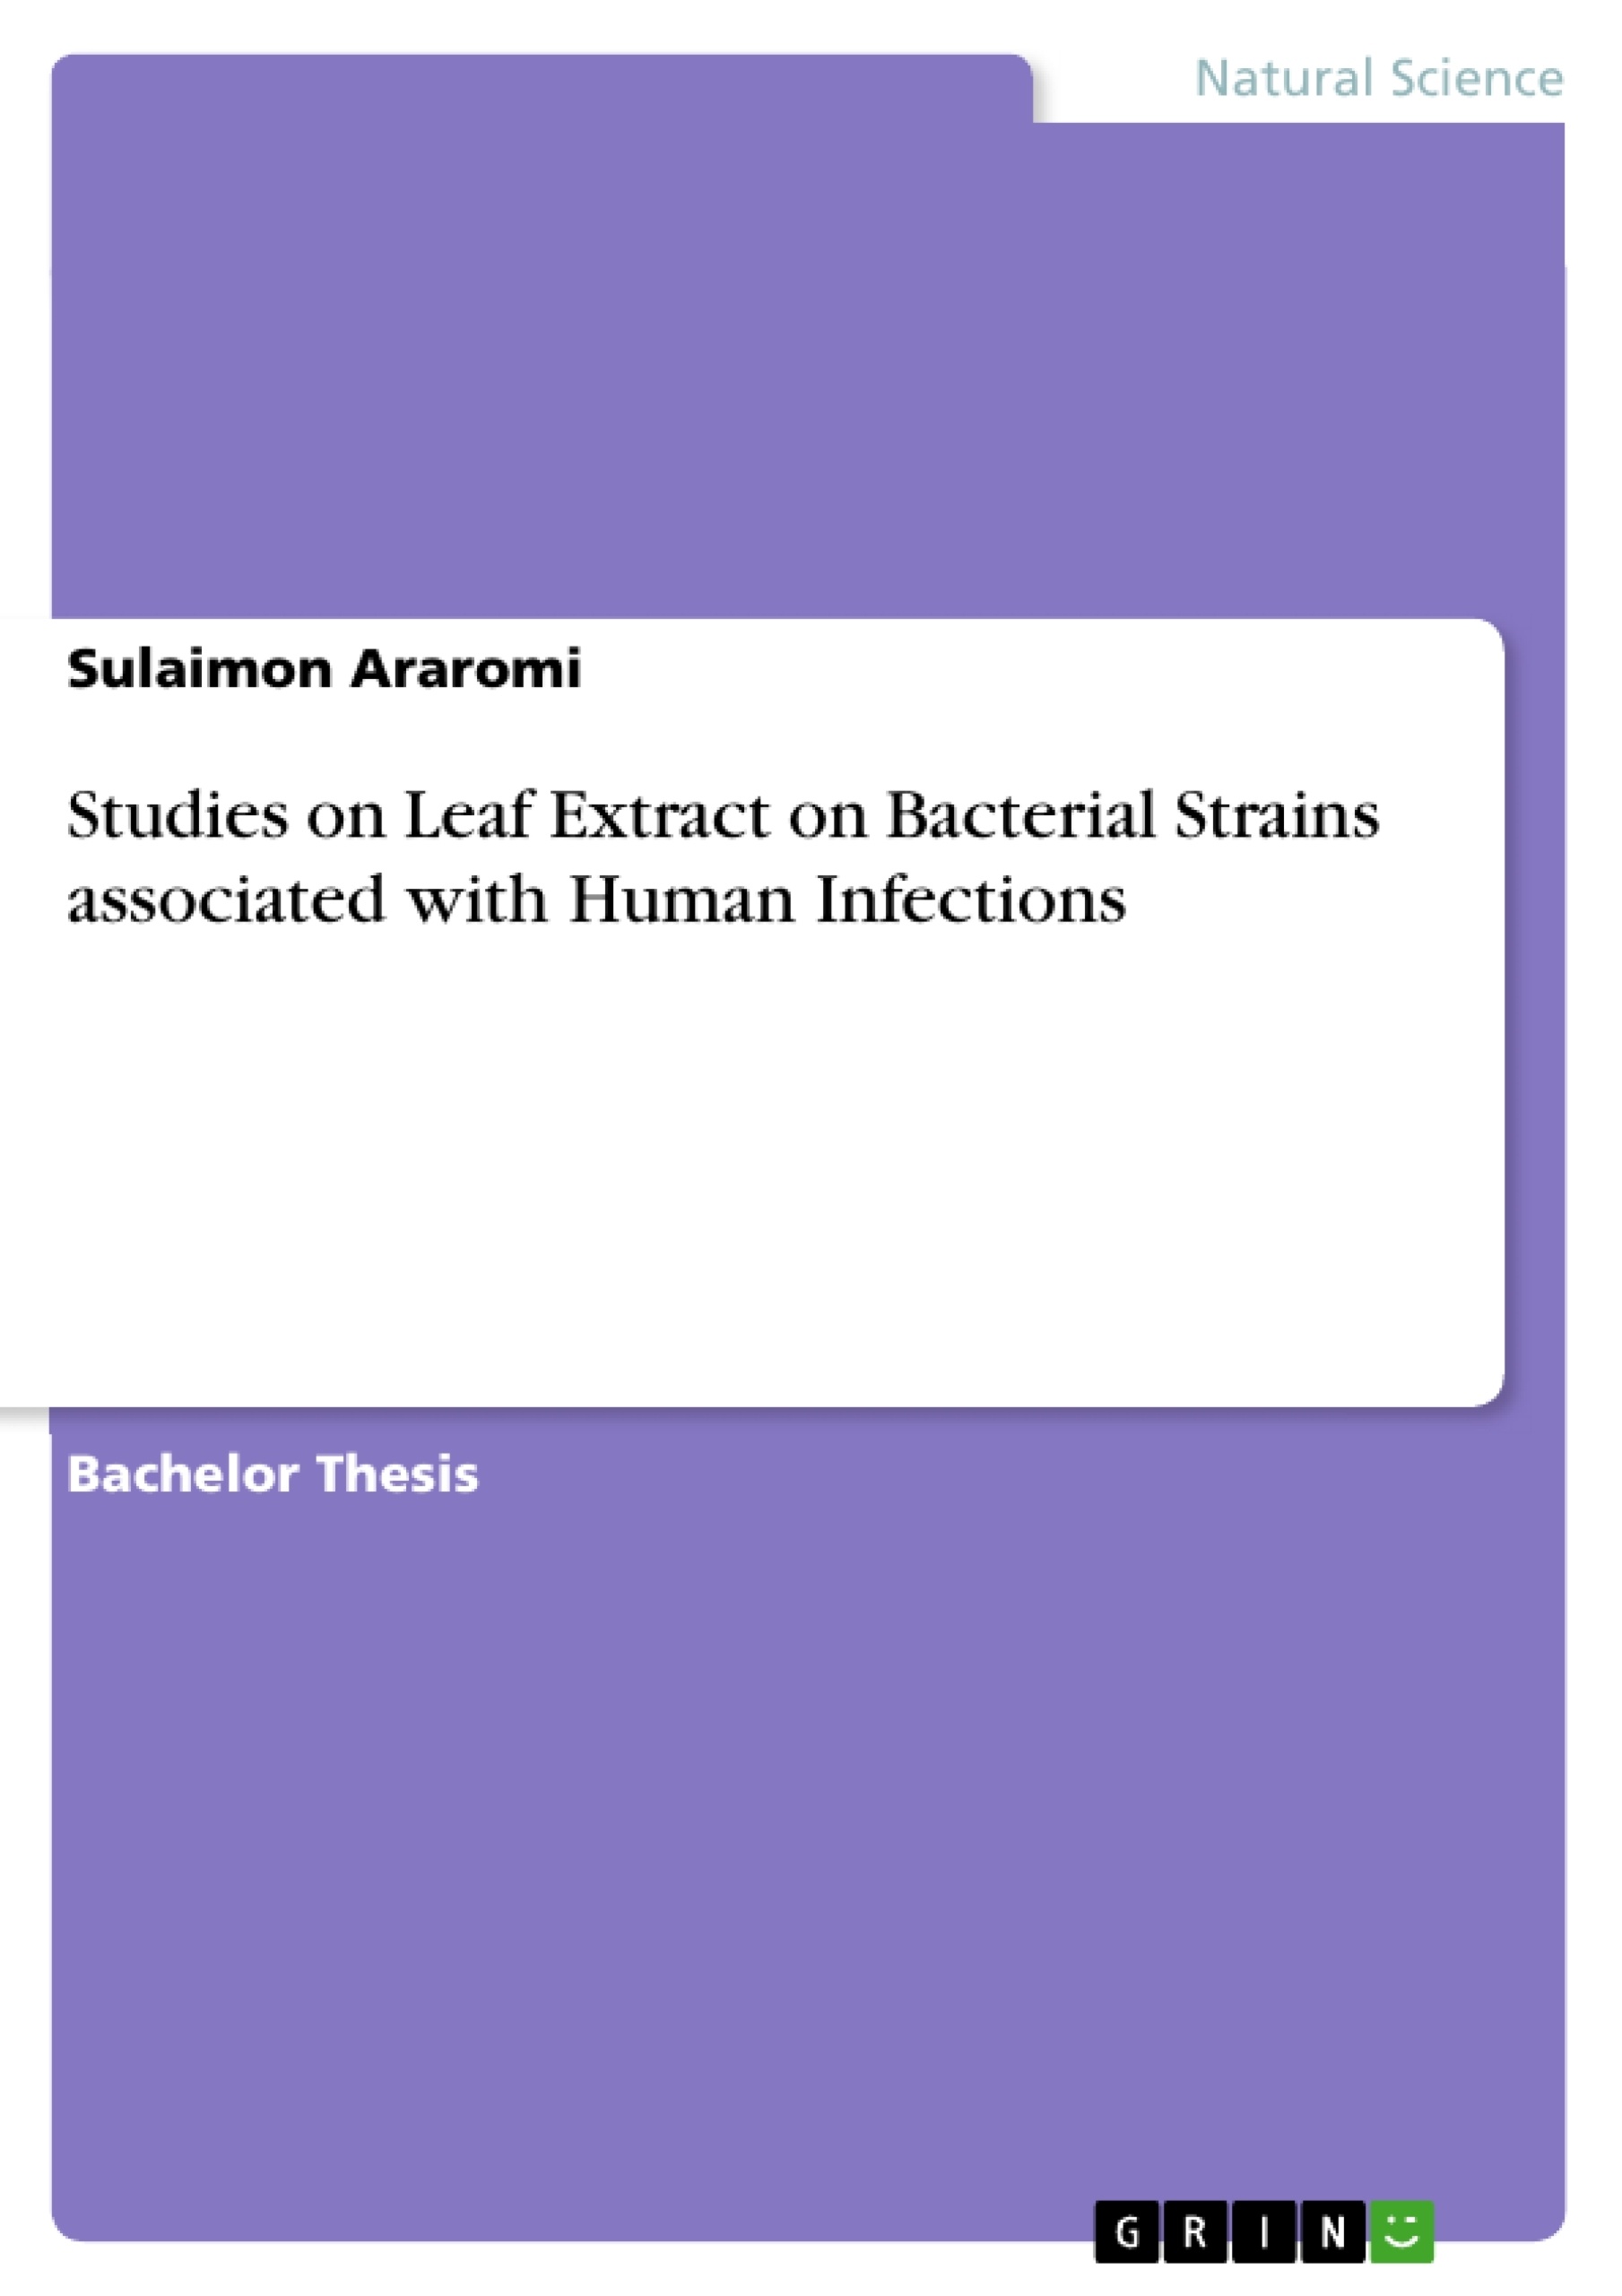 Título: Studies on Leaf Extract on Bacterial Strains associated with Human Infections